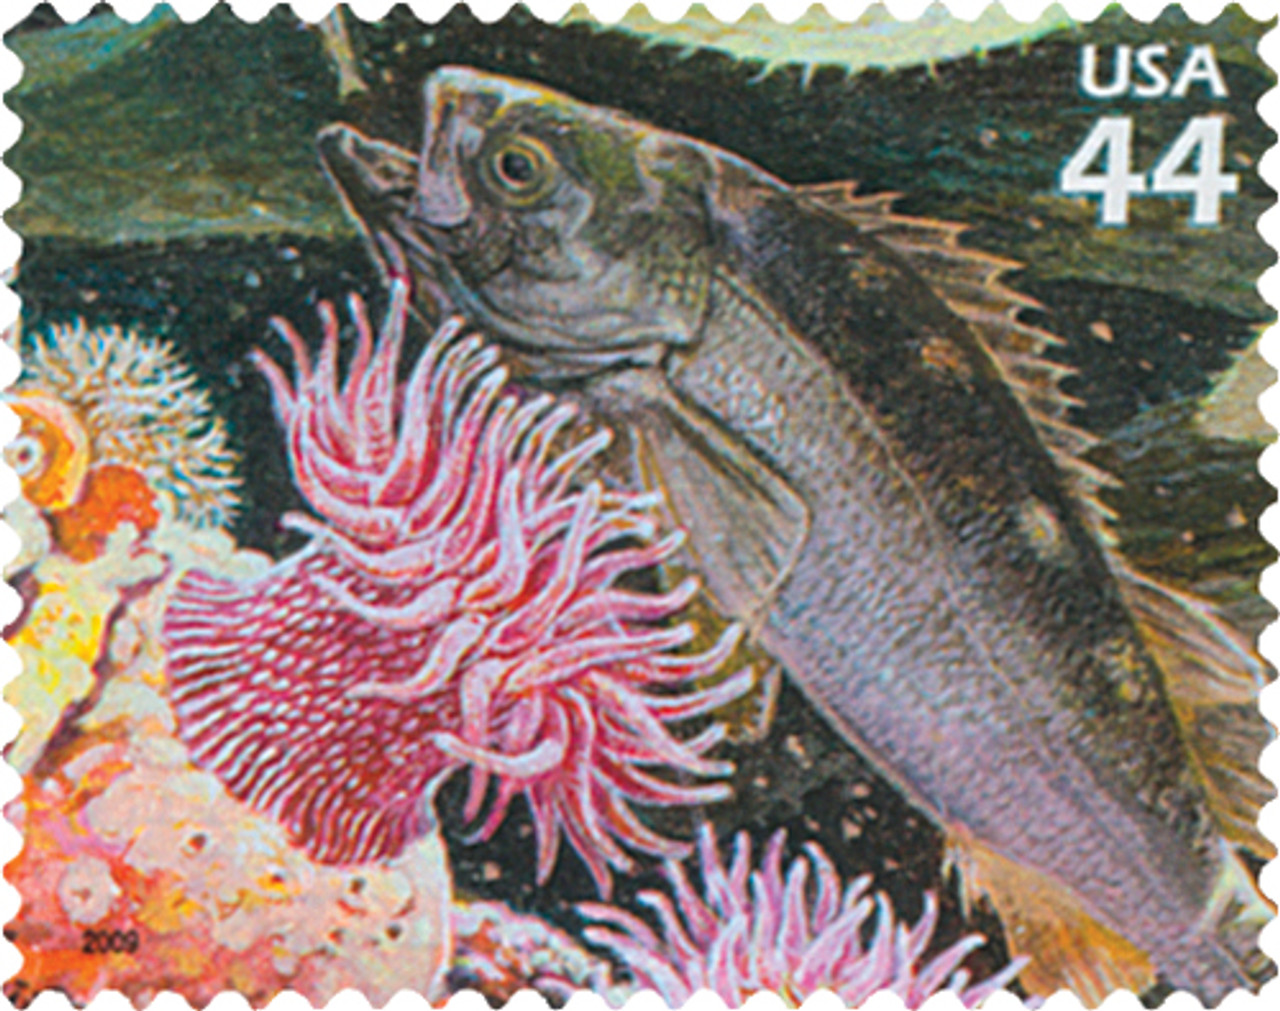 4423e - 2009 44c Kelp Forest: Rockfish and White Spotted Rose Anemone -  Mystic Stamp Company